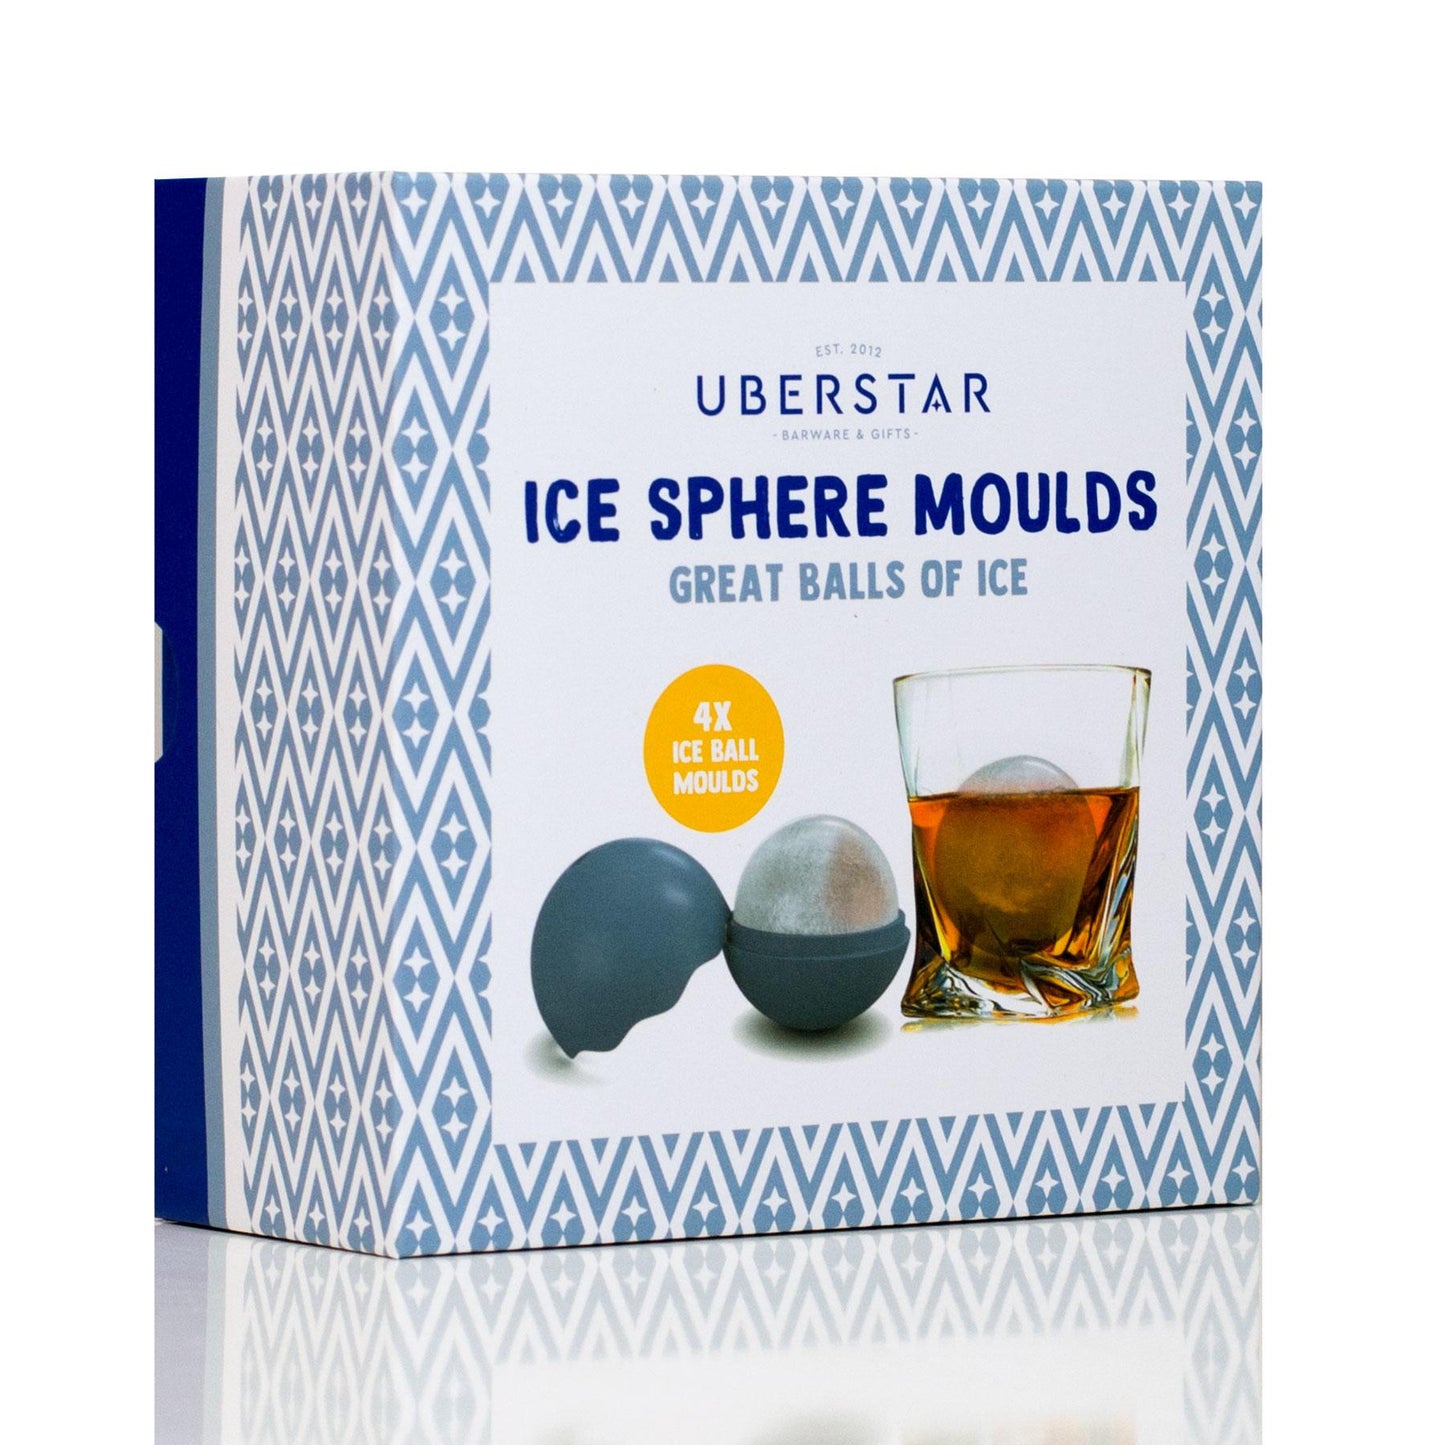 Ice cube sphere moulds